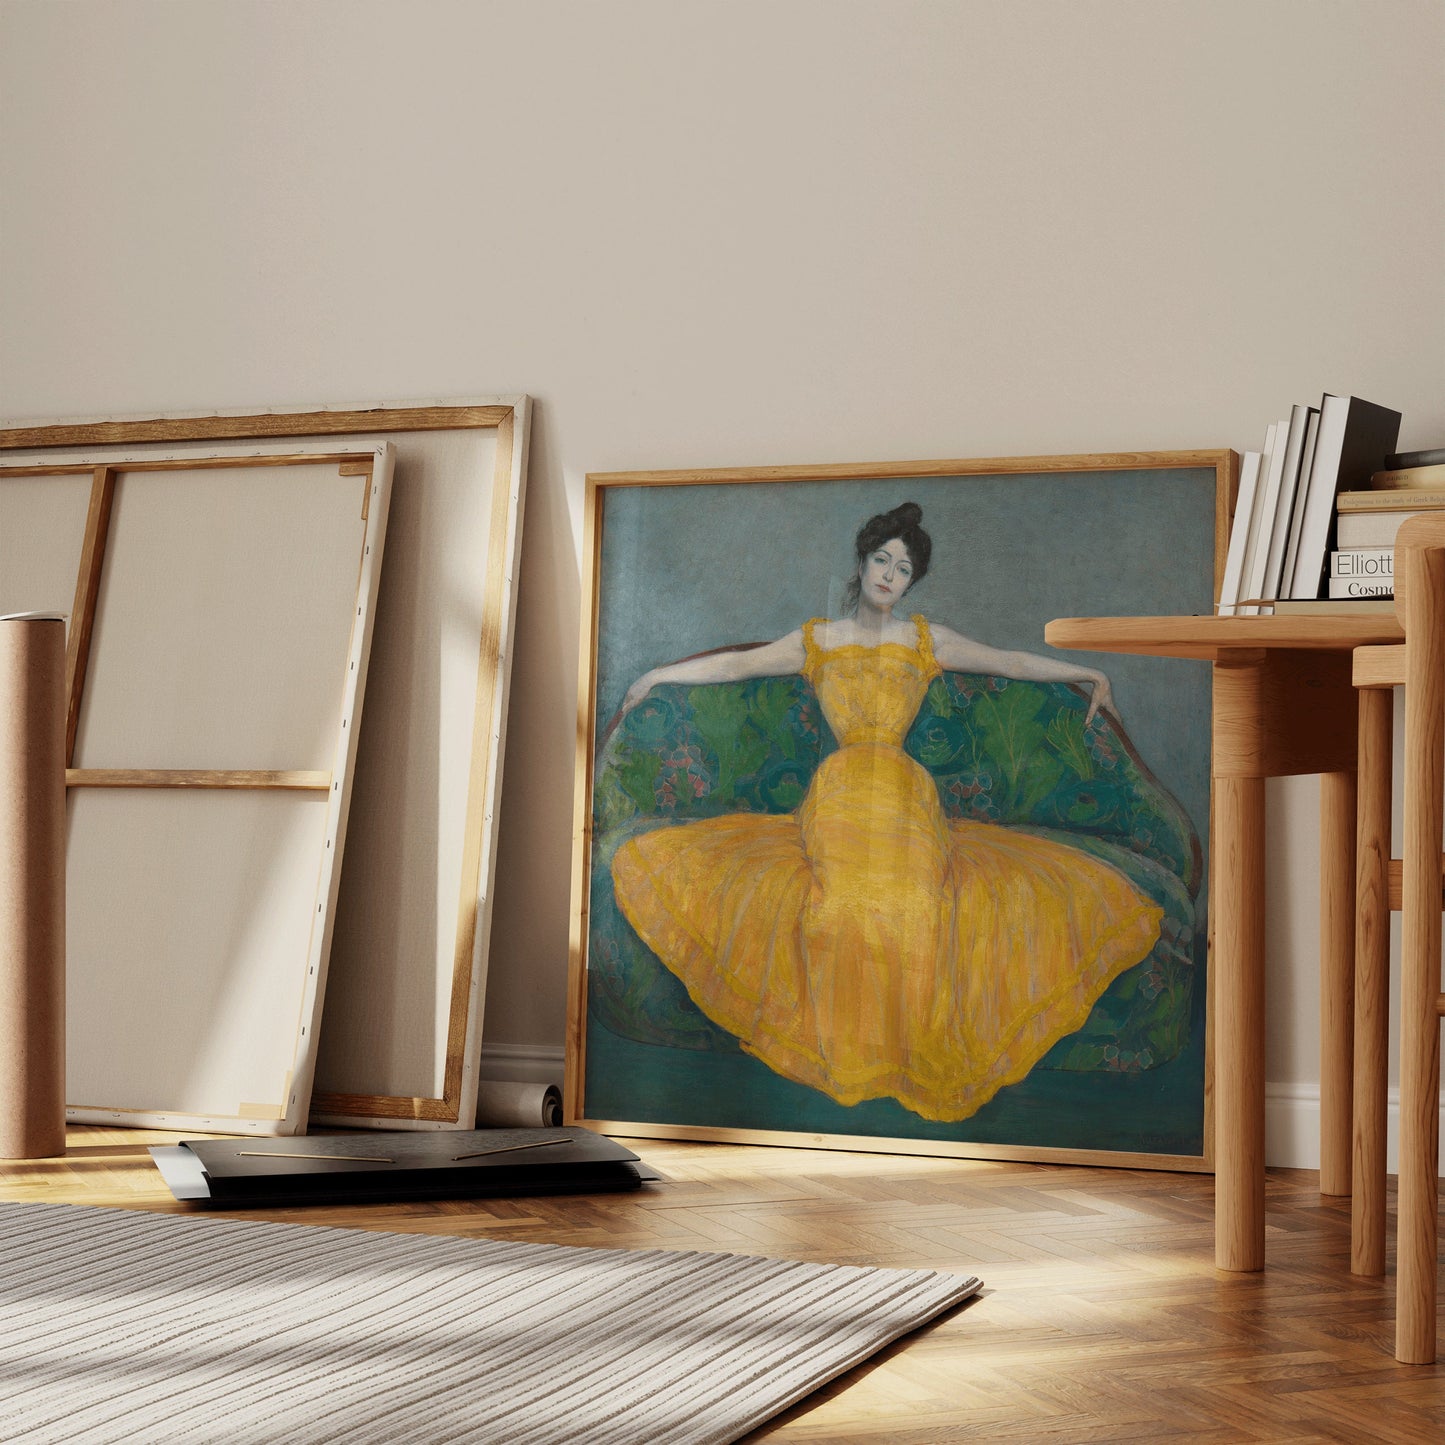 Kurzweil Woman in Yellow Famous Painting Farmhouse American artist Decor Housewarming Gift Framed Ready to Hang Home Office Decor Square